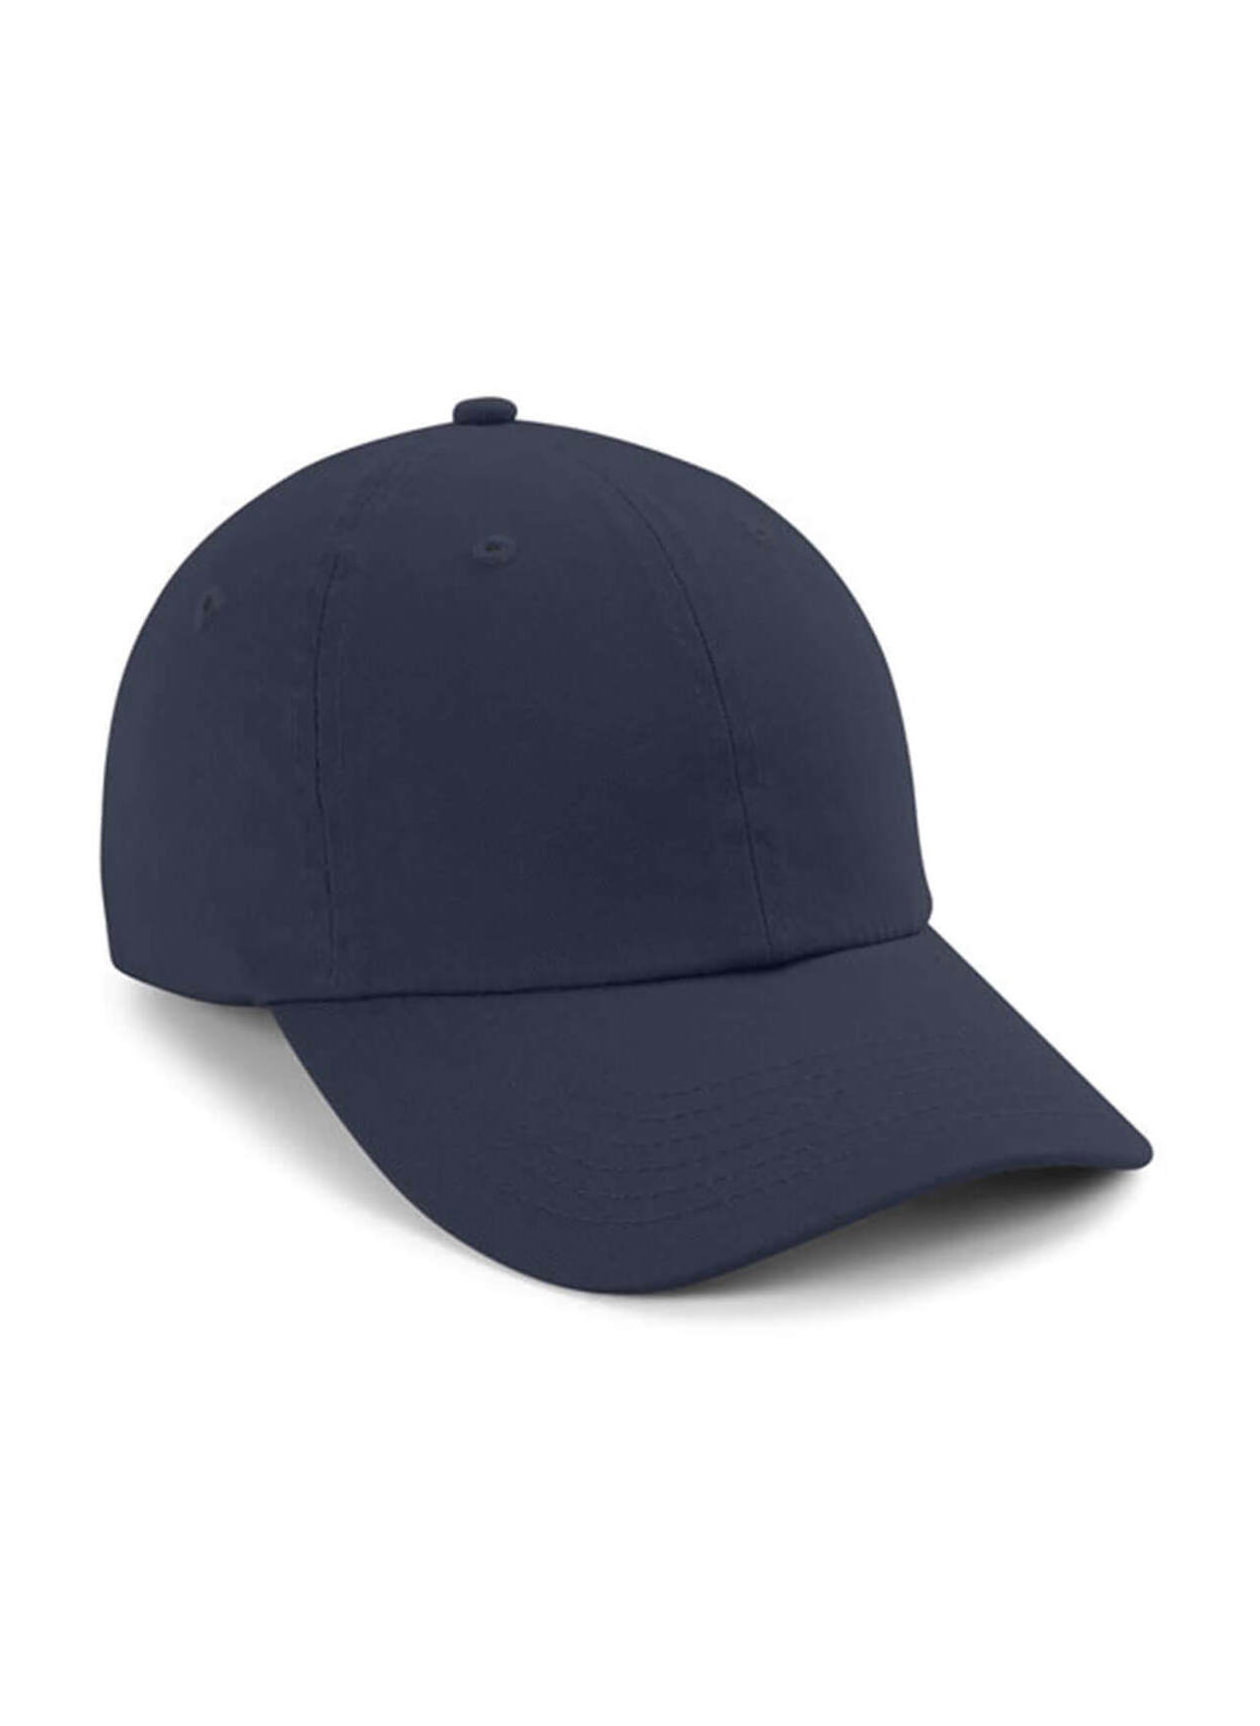 Imperial Navy The Original Buckle Hat